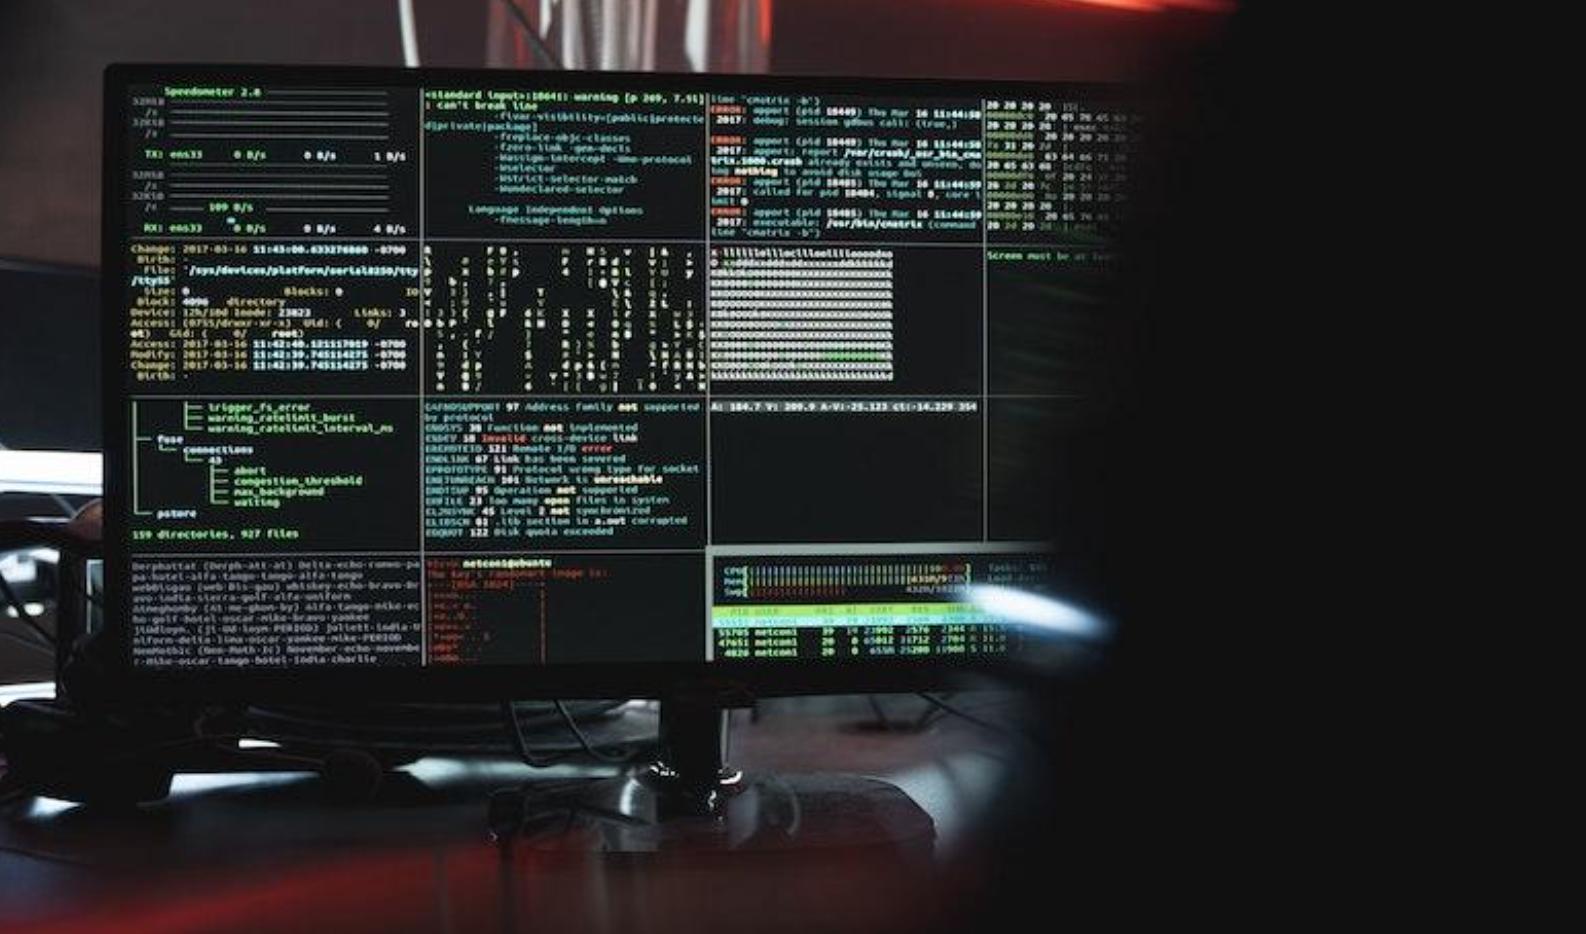 Possible cyber attack on a computer. Photo by Pexels.